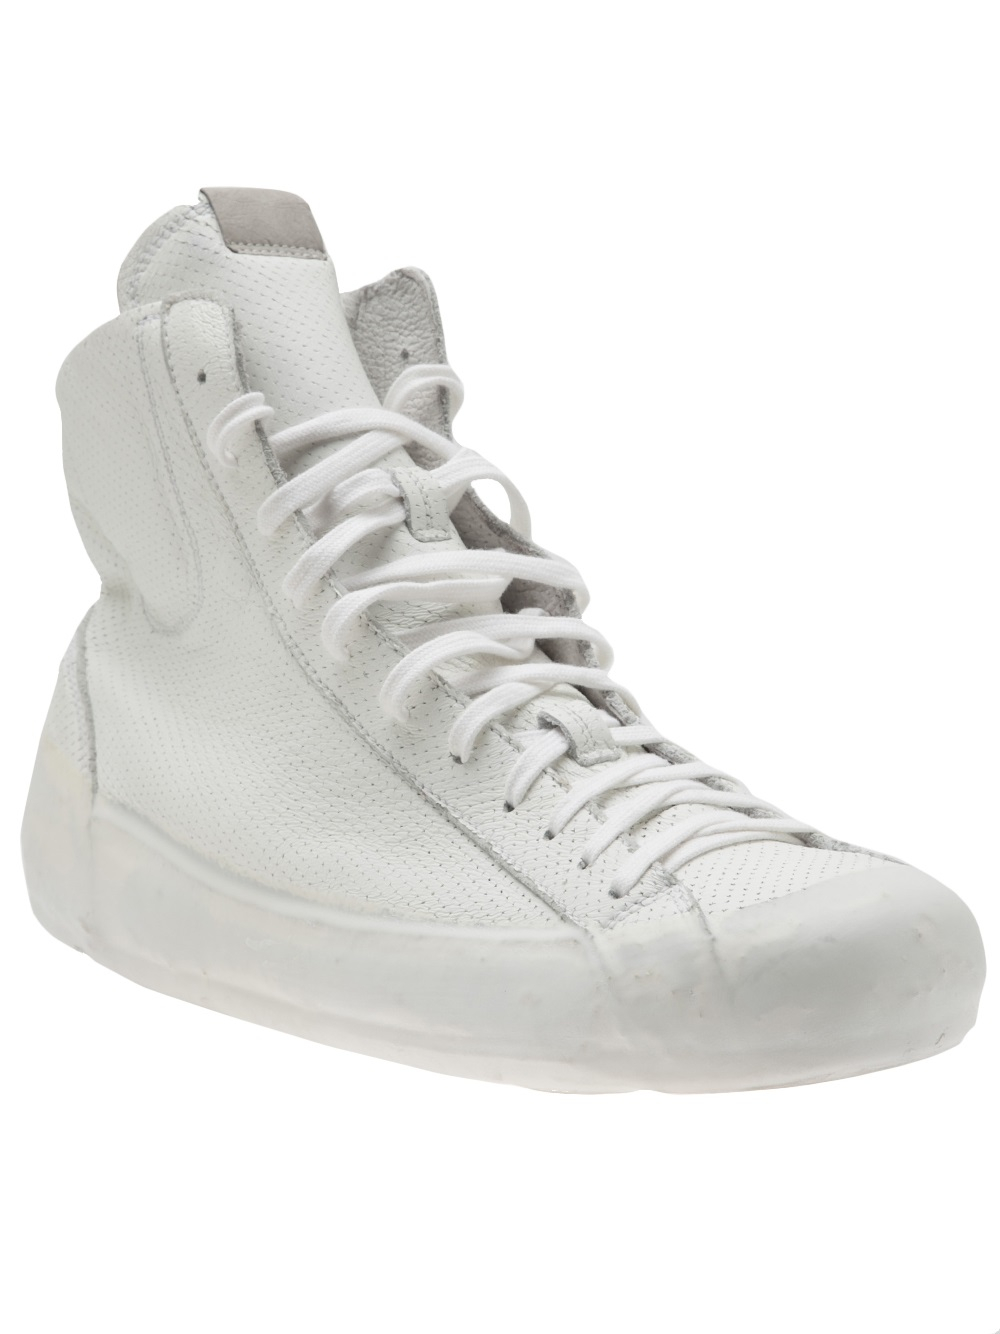 Oxs Rubber Soul Leather High-Top Sneakers in White for Men | Lyst